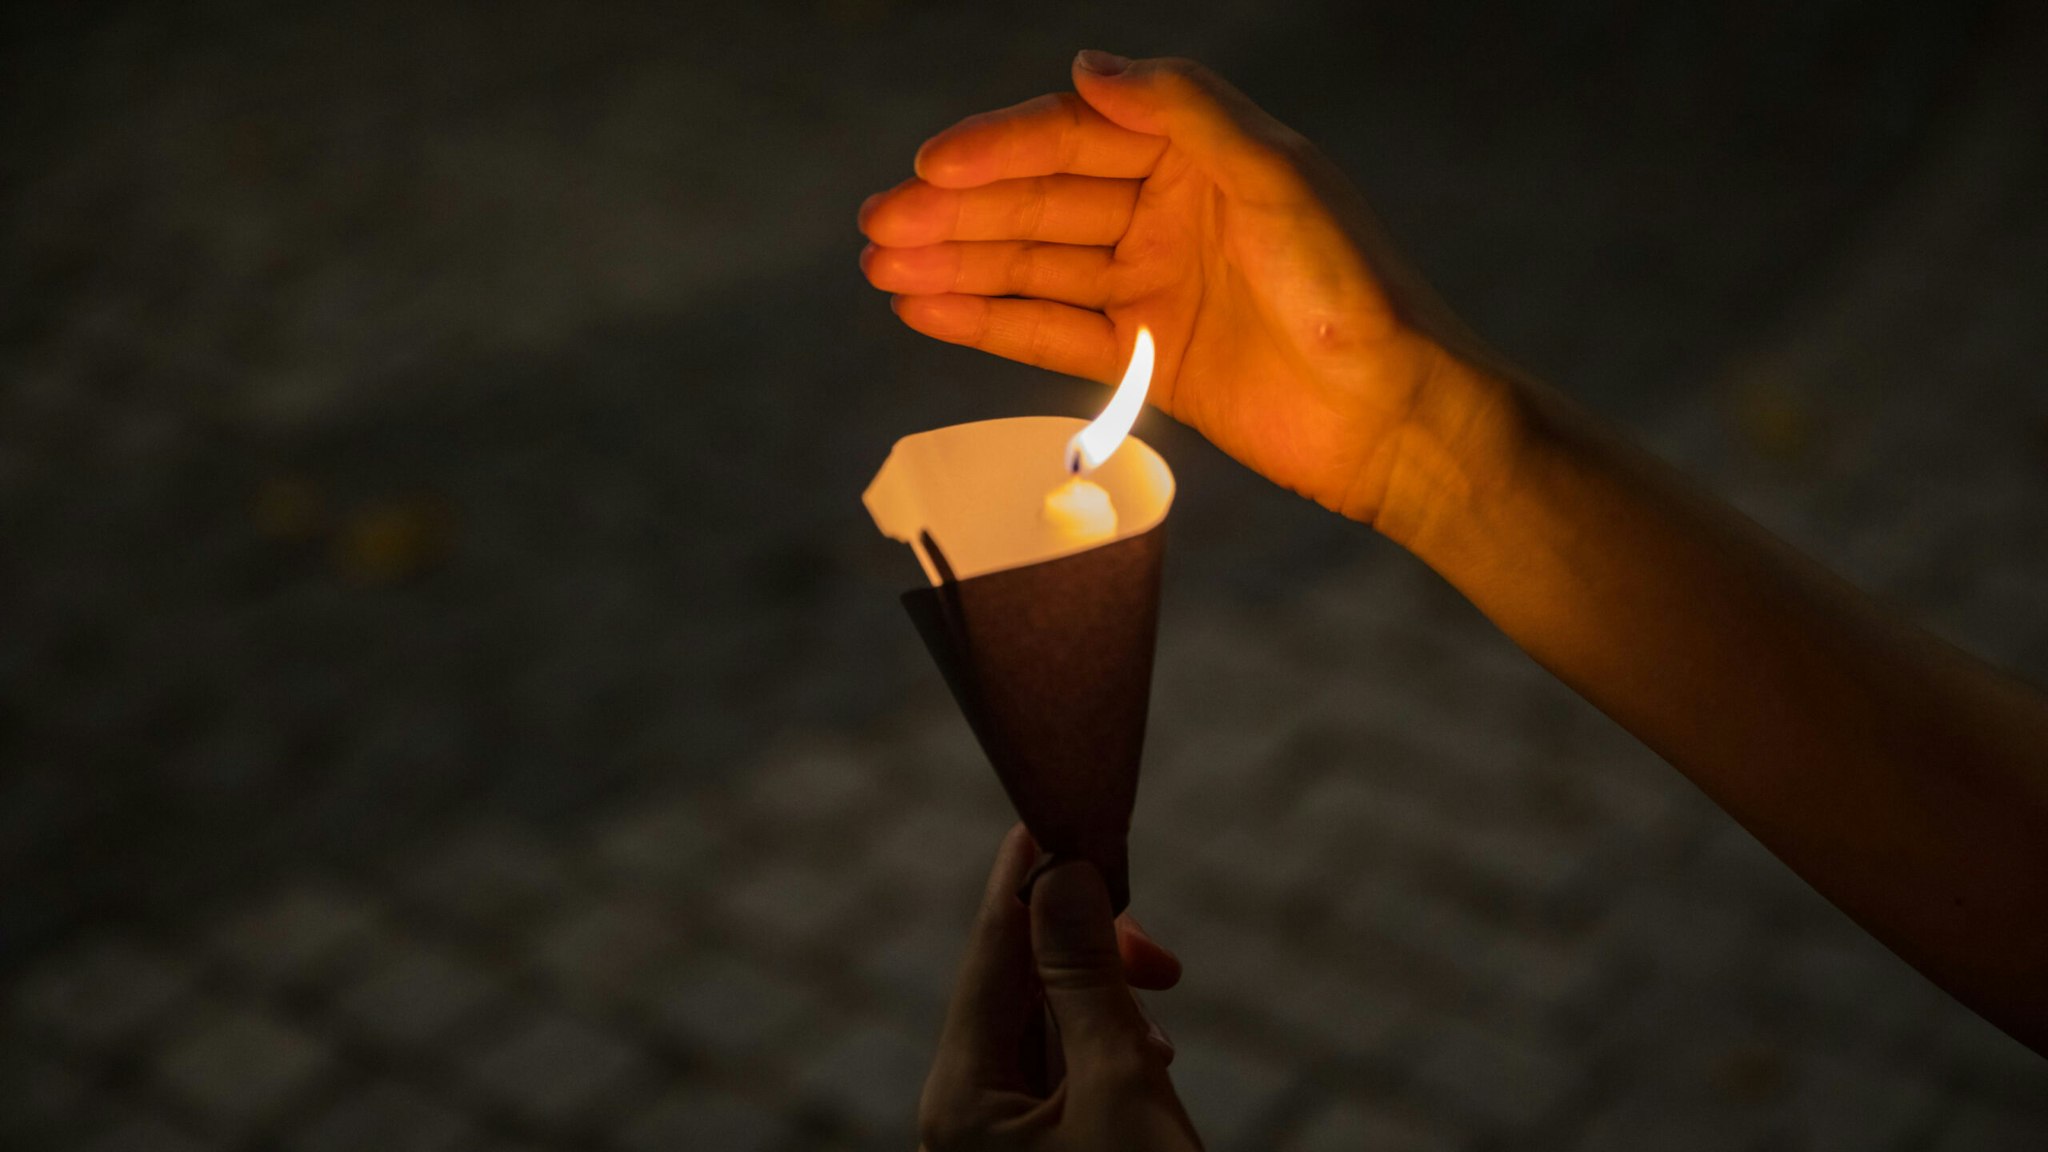 A woman holds a candle during a mass outside a church in Hong Kong on June 4, 2020, to mark the 31st anniversary of the 1989 Tiananmen crackdown in Beijing.